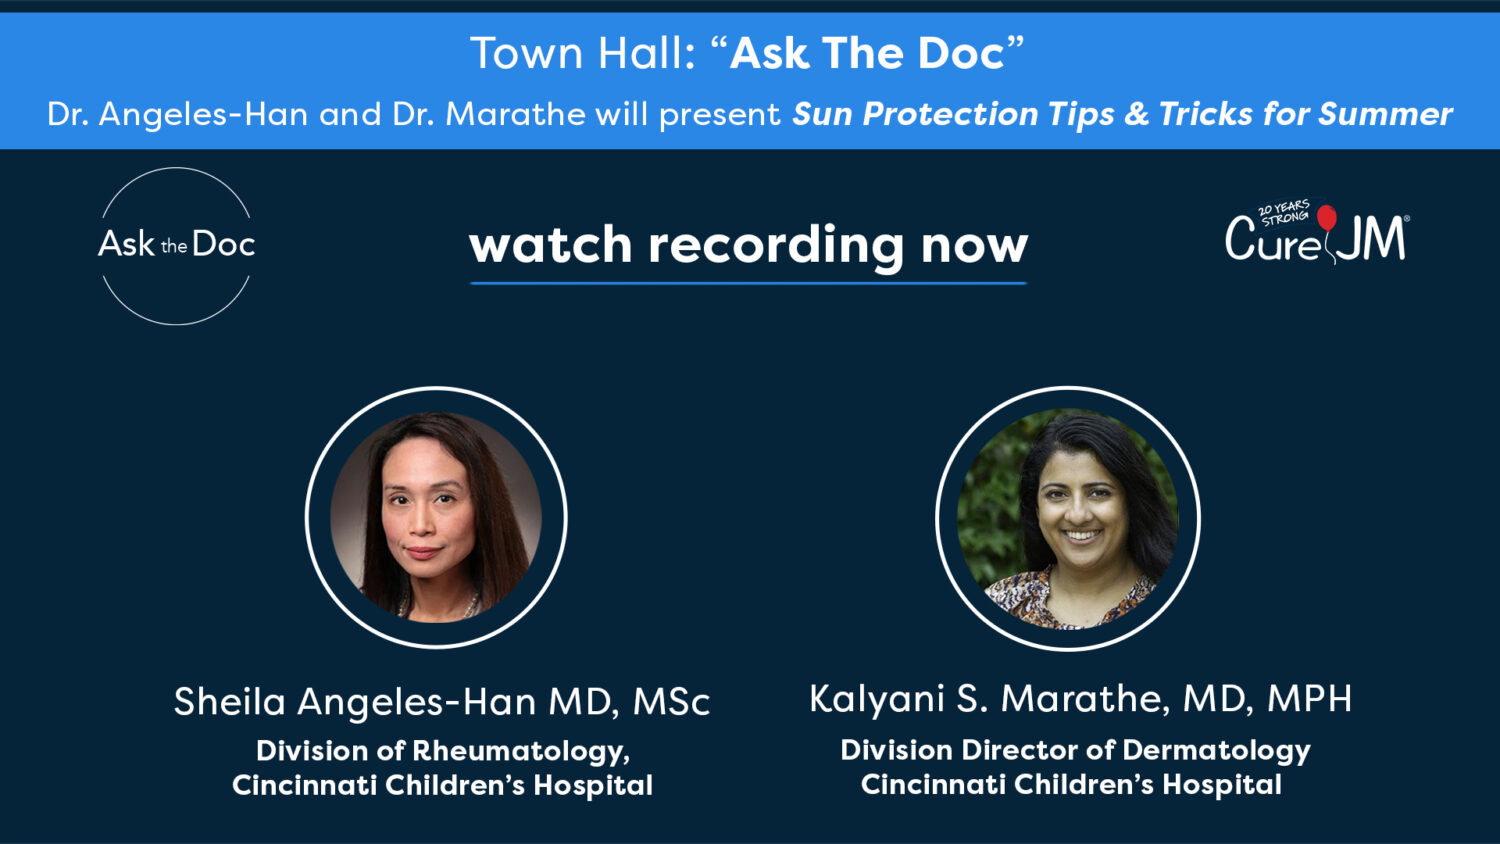 Ask the Doc - Sun Protection Tricks and Tips - Sheila Angeles Han and Kalyani Marathe